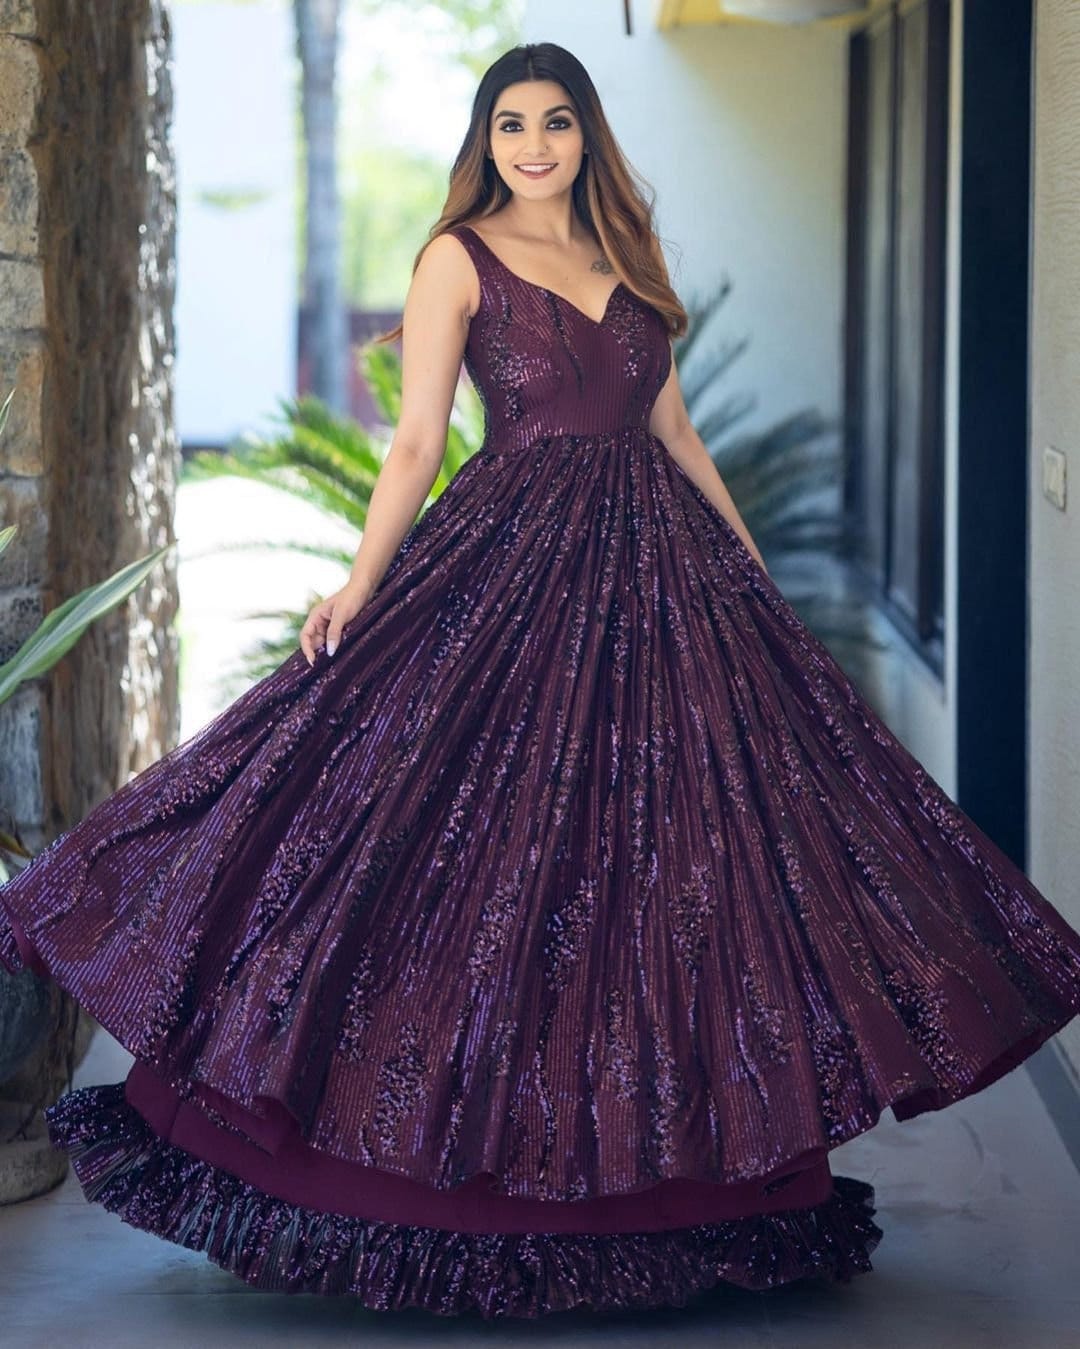 Purple Plum Georgette Gown Party Wear Maxi Dress Prom Dress Layered Dress  Sparkling Outfit Cocktail Engagement Homecoming Custom Ready2wear - Etsy  Denmark